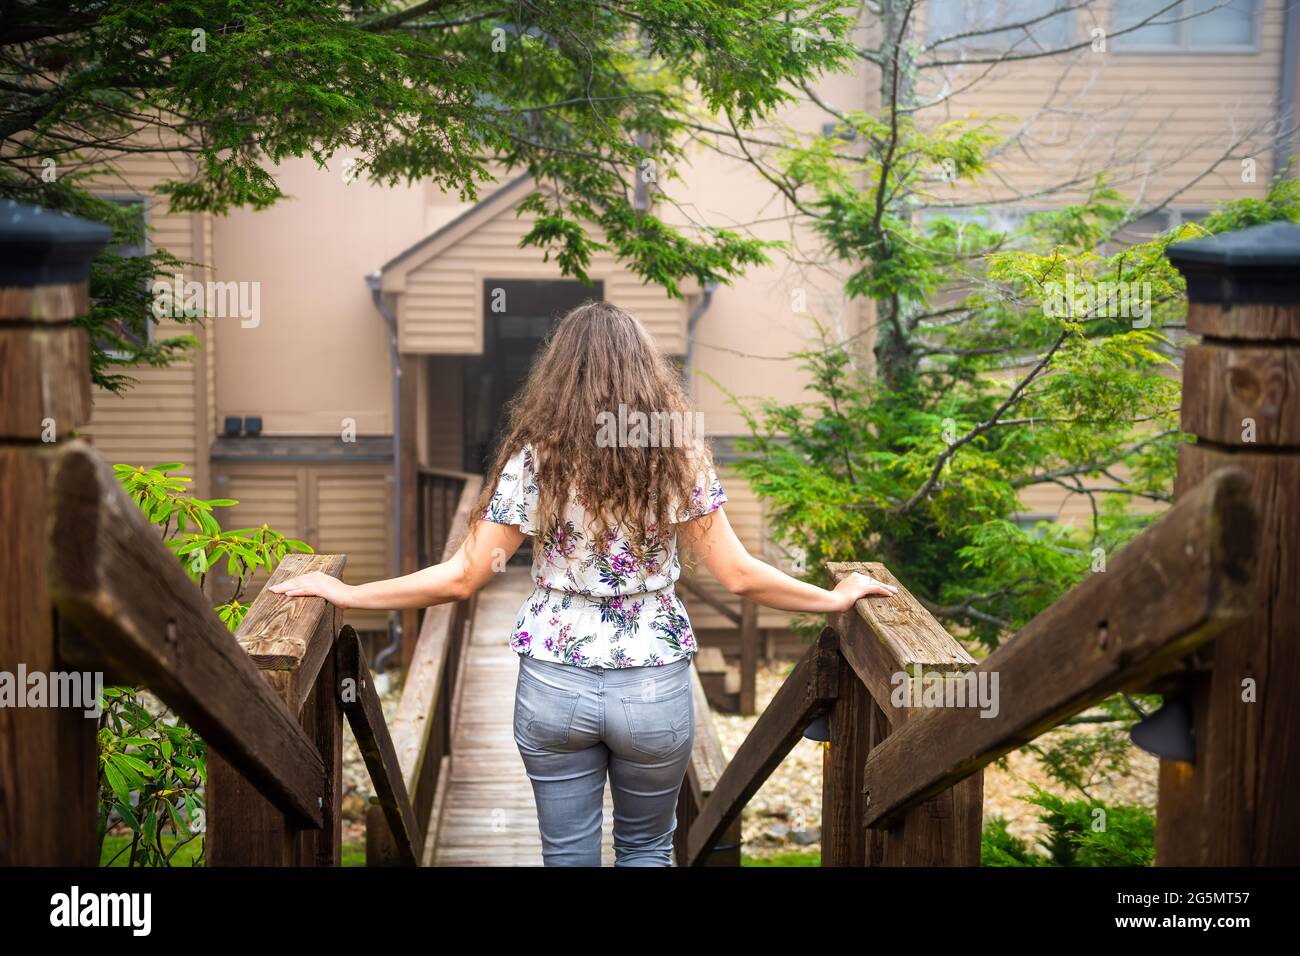 Wooden boardwalk entrance and woman person walking back to Wintergreen Resort, Virginia condo apartment condominium building for rent or rental proper Stock Photo